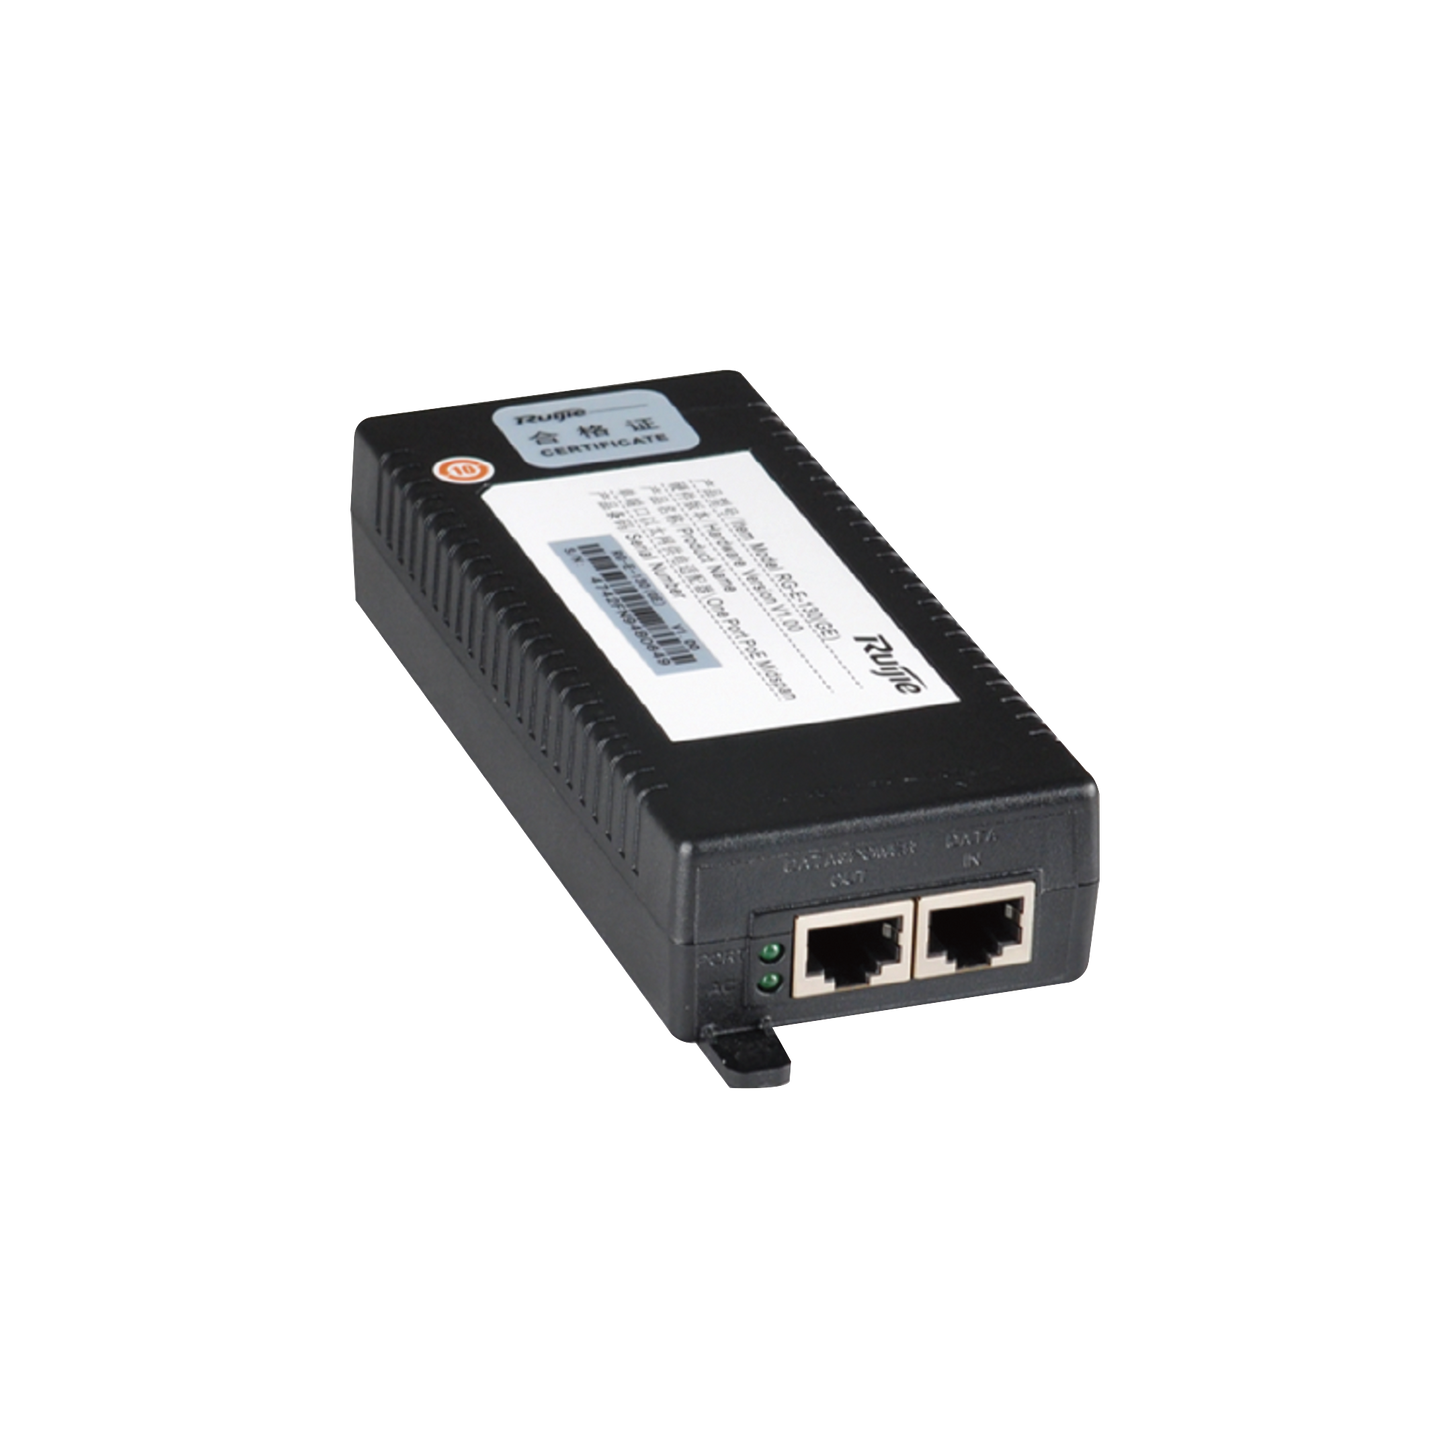 RG-POE-AT30, 1-port PoE adapter